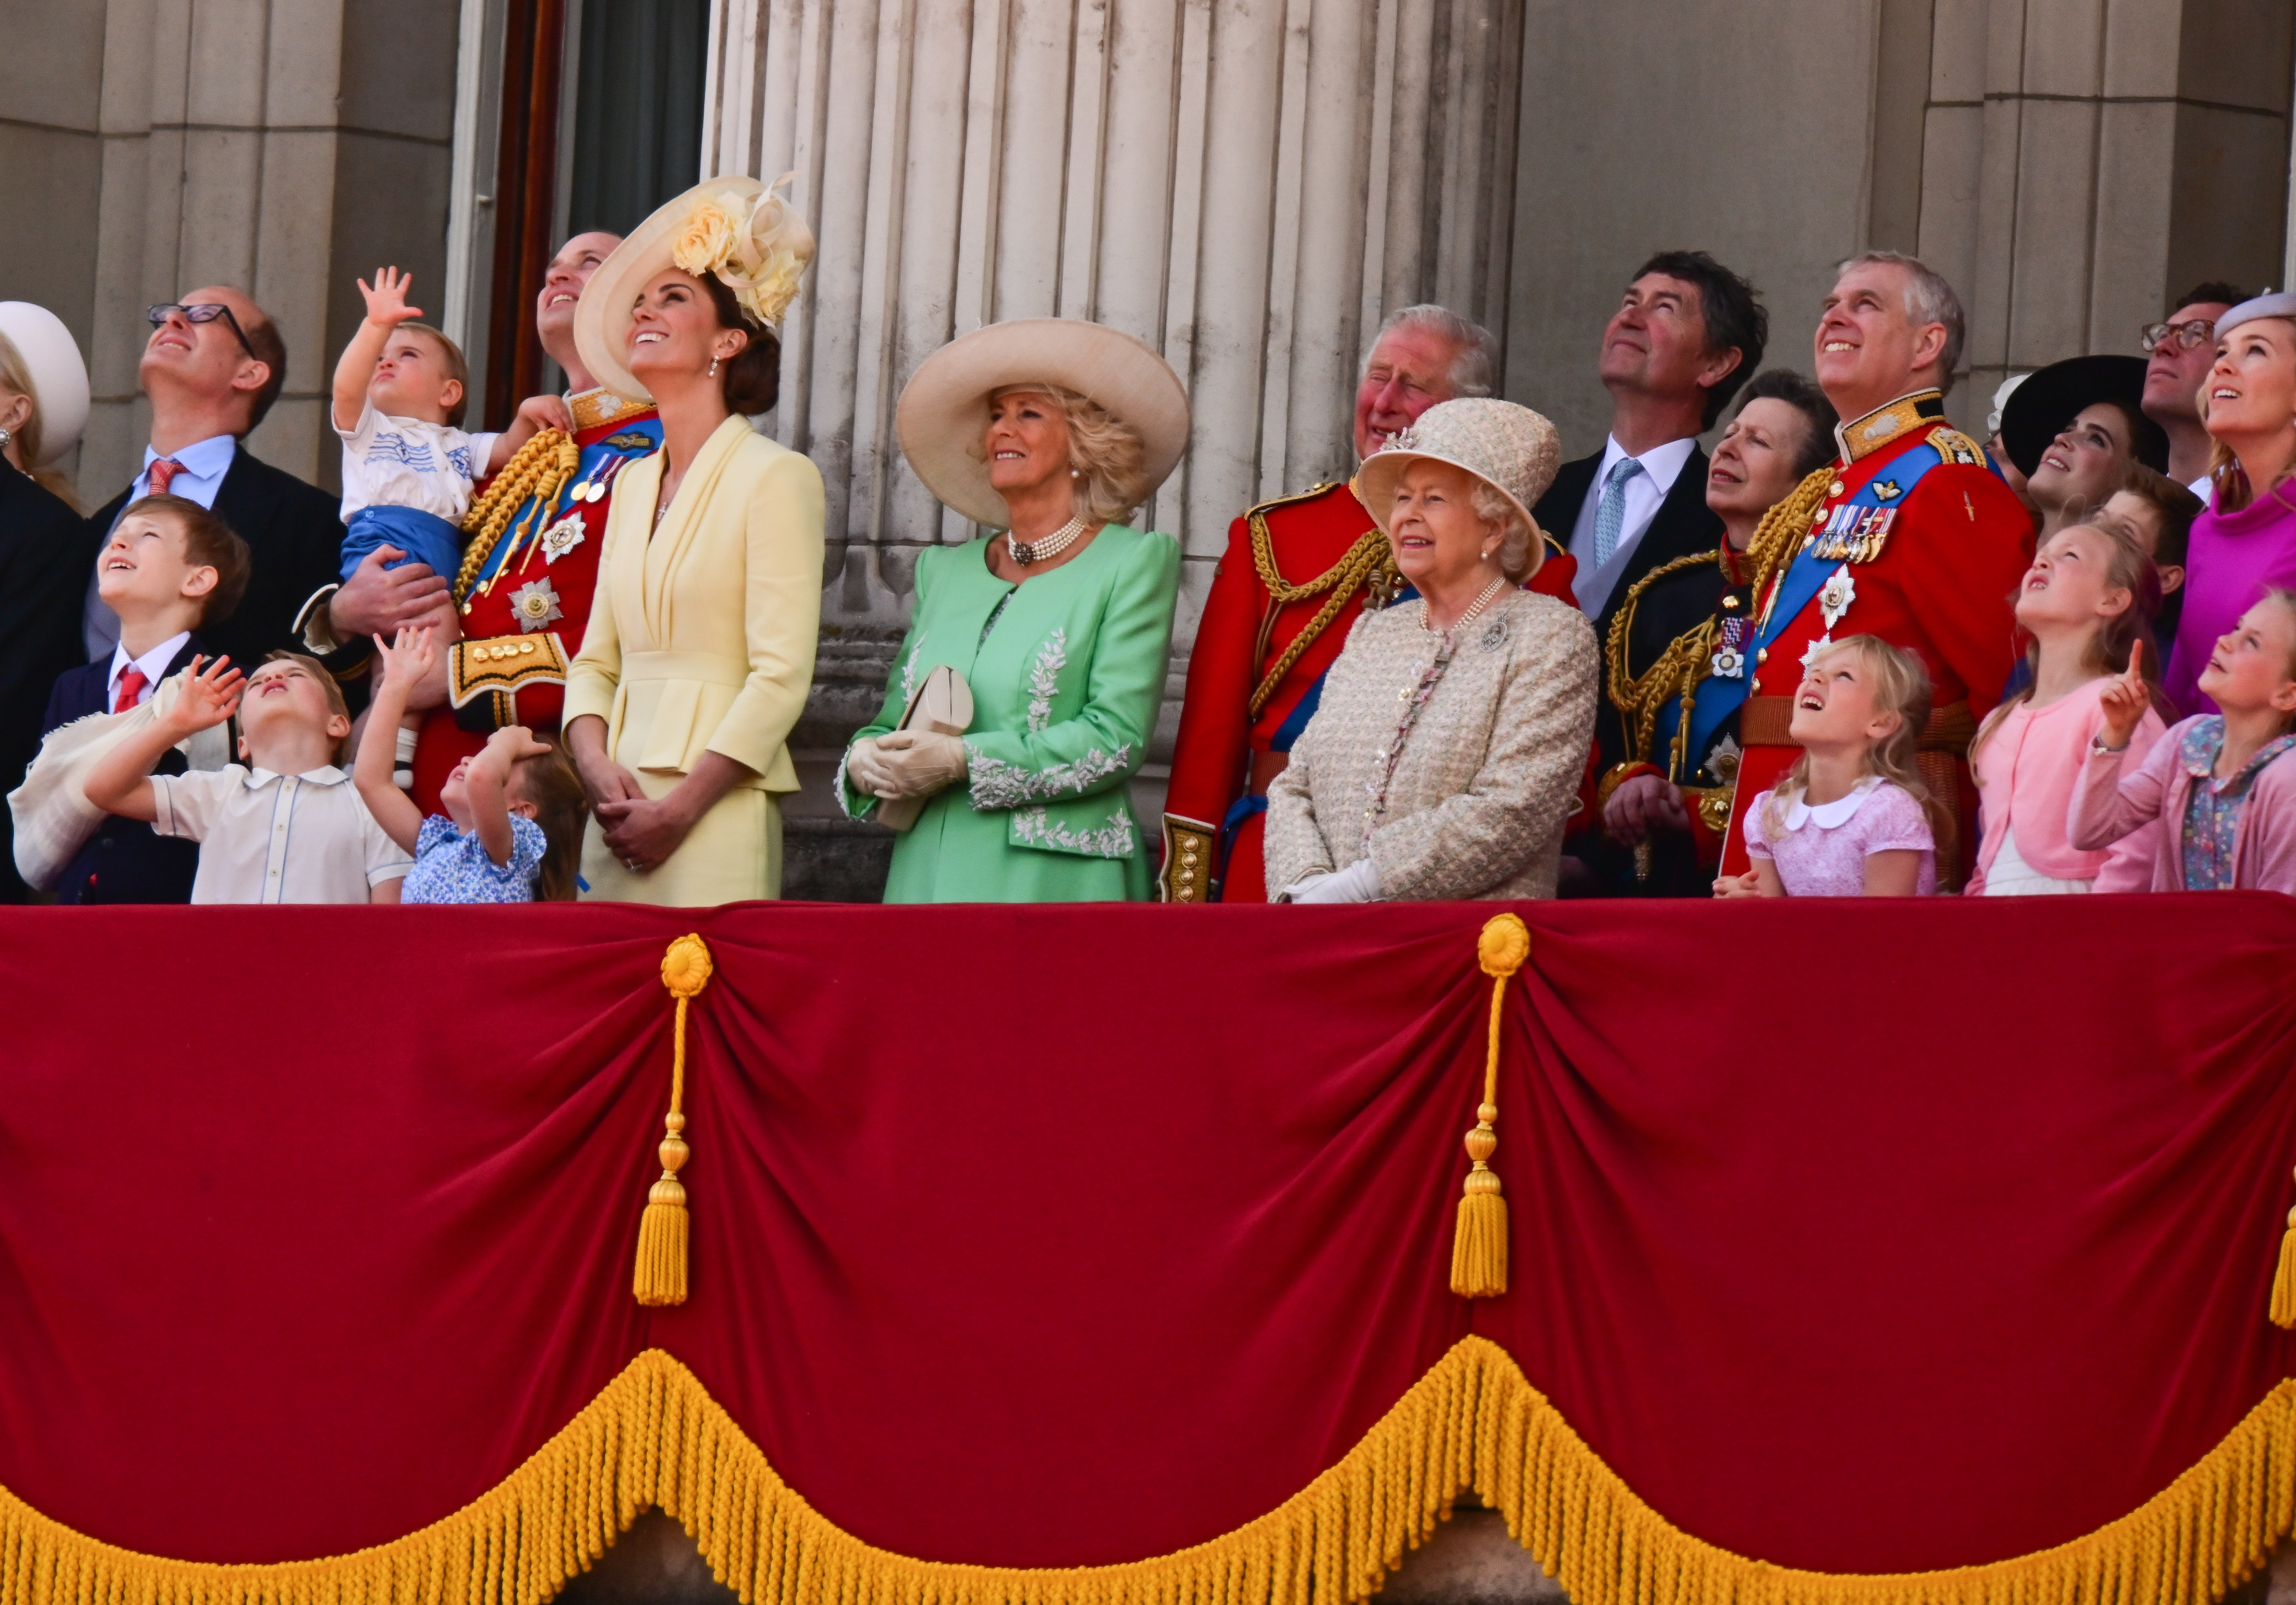 Queen Elizabeth II and her family members on the balcony of Buckingham Palace during the Trooping the Colour ceremony in 2019